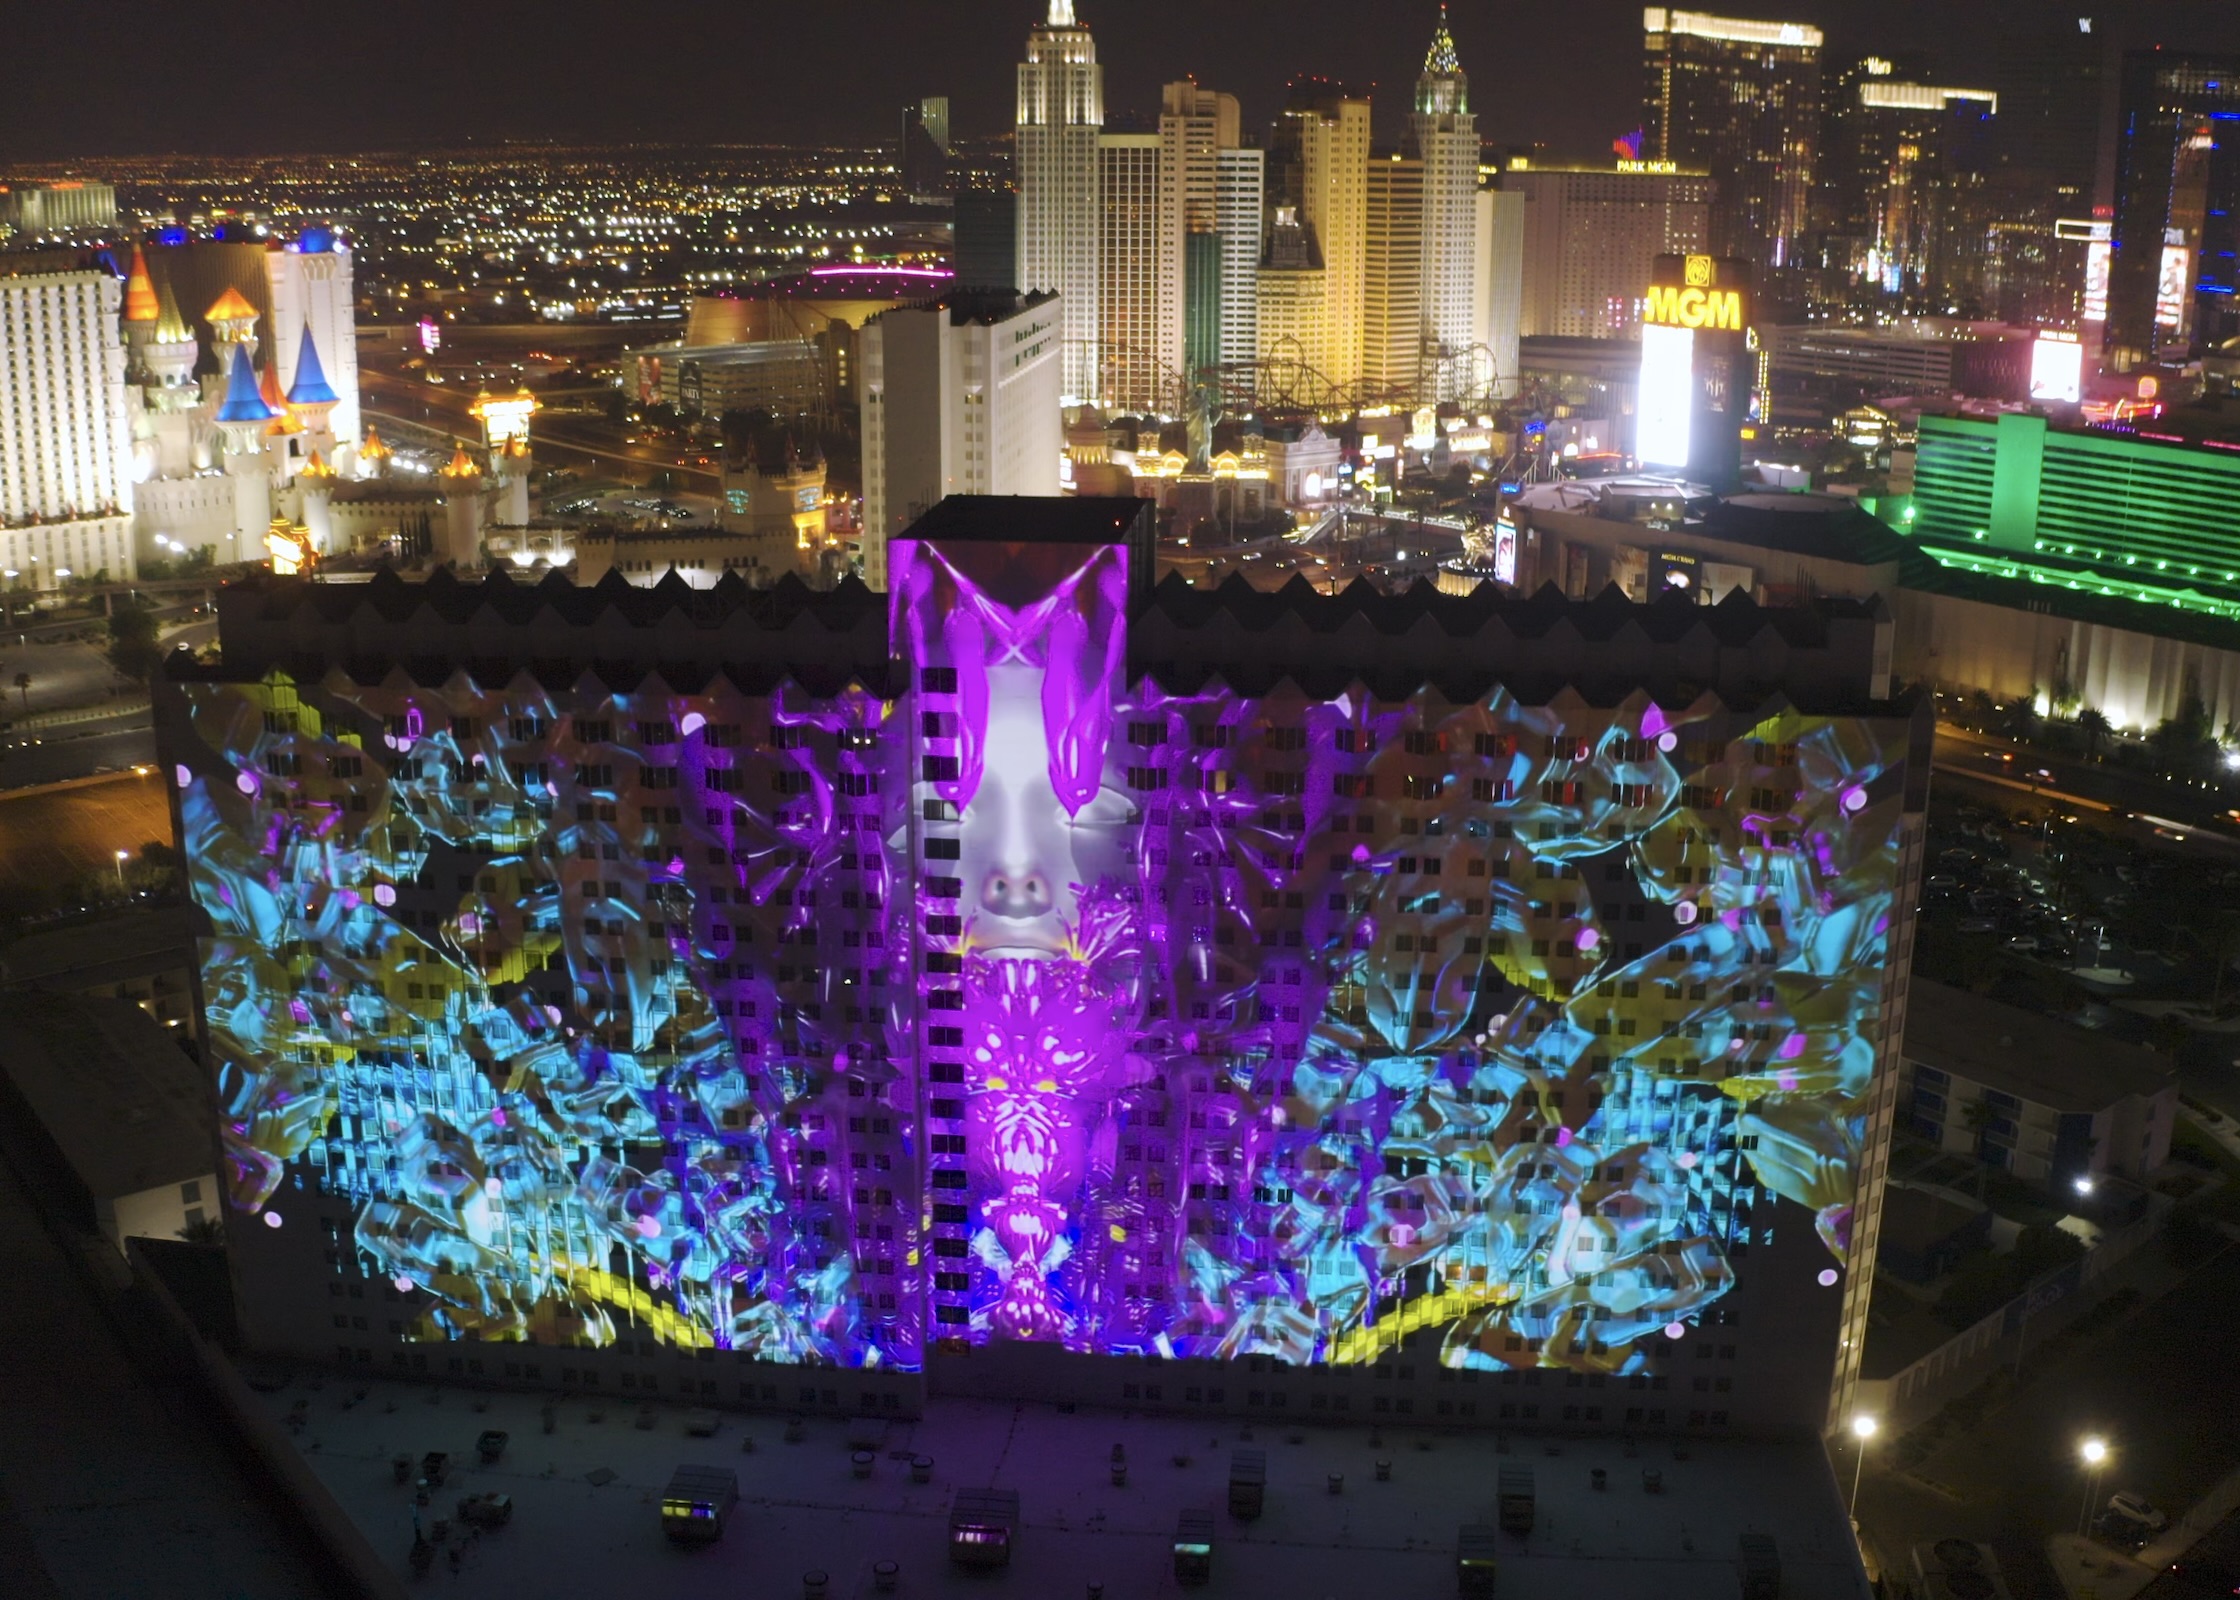 “Revival” a World Record Project in Las Vegas